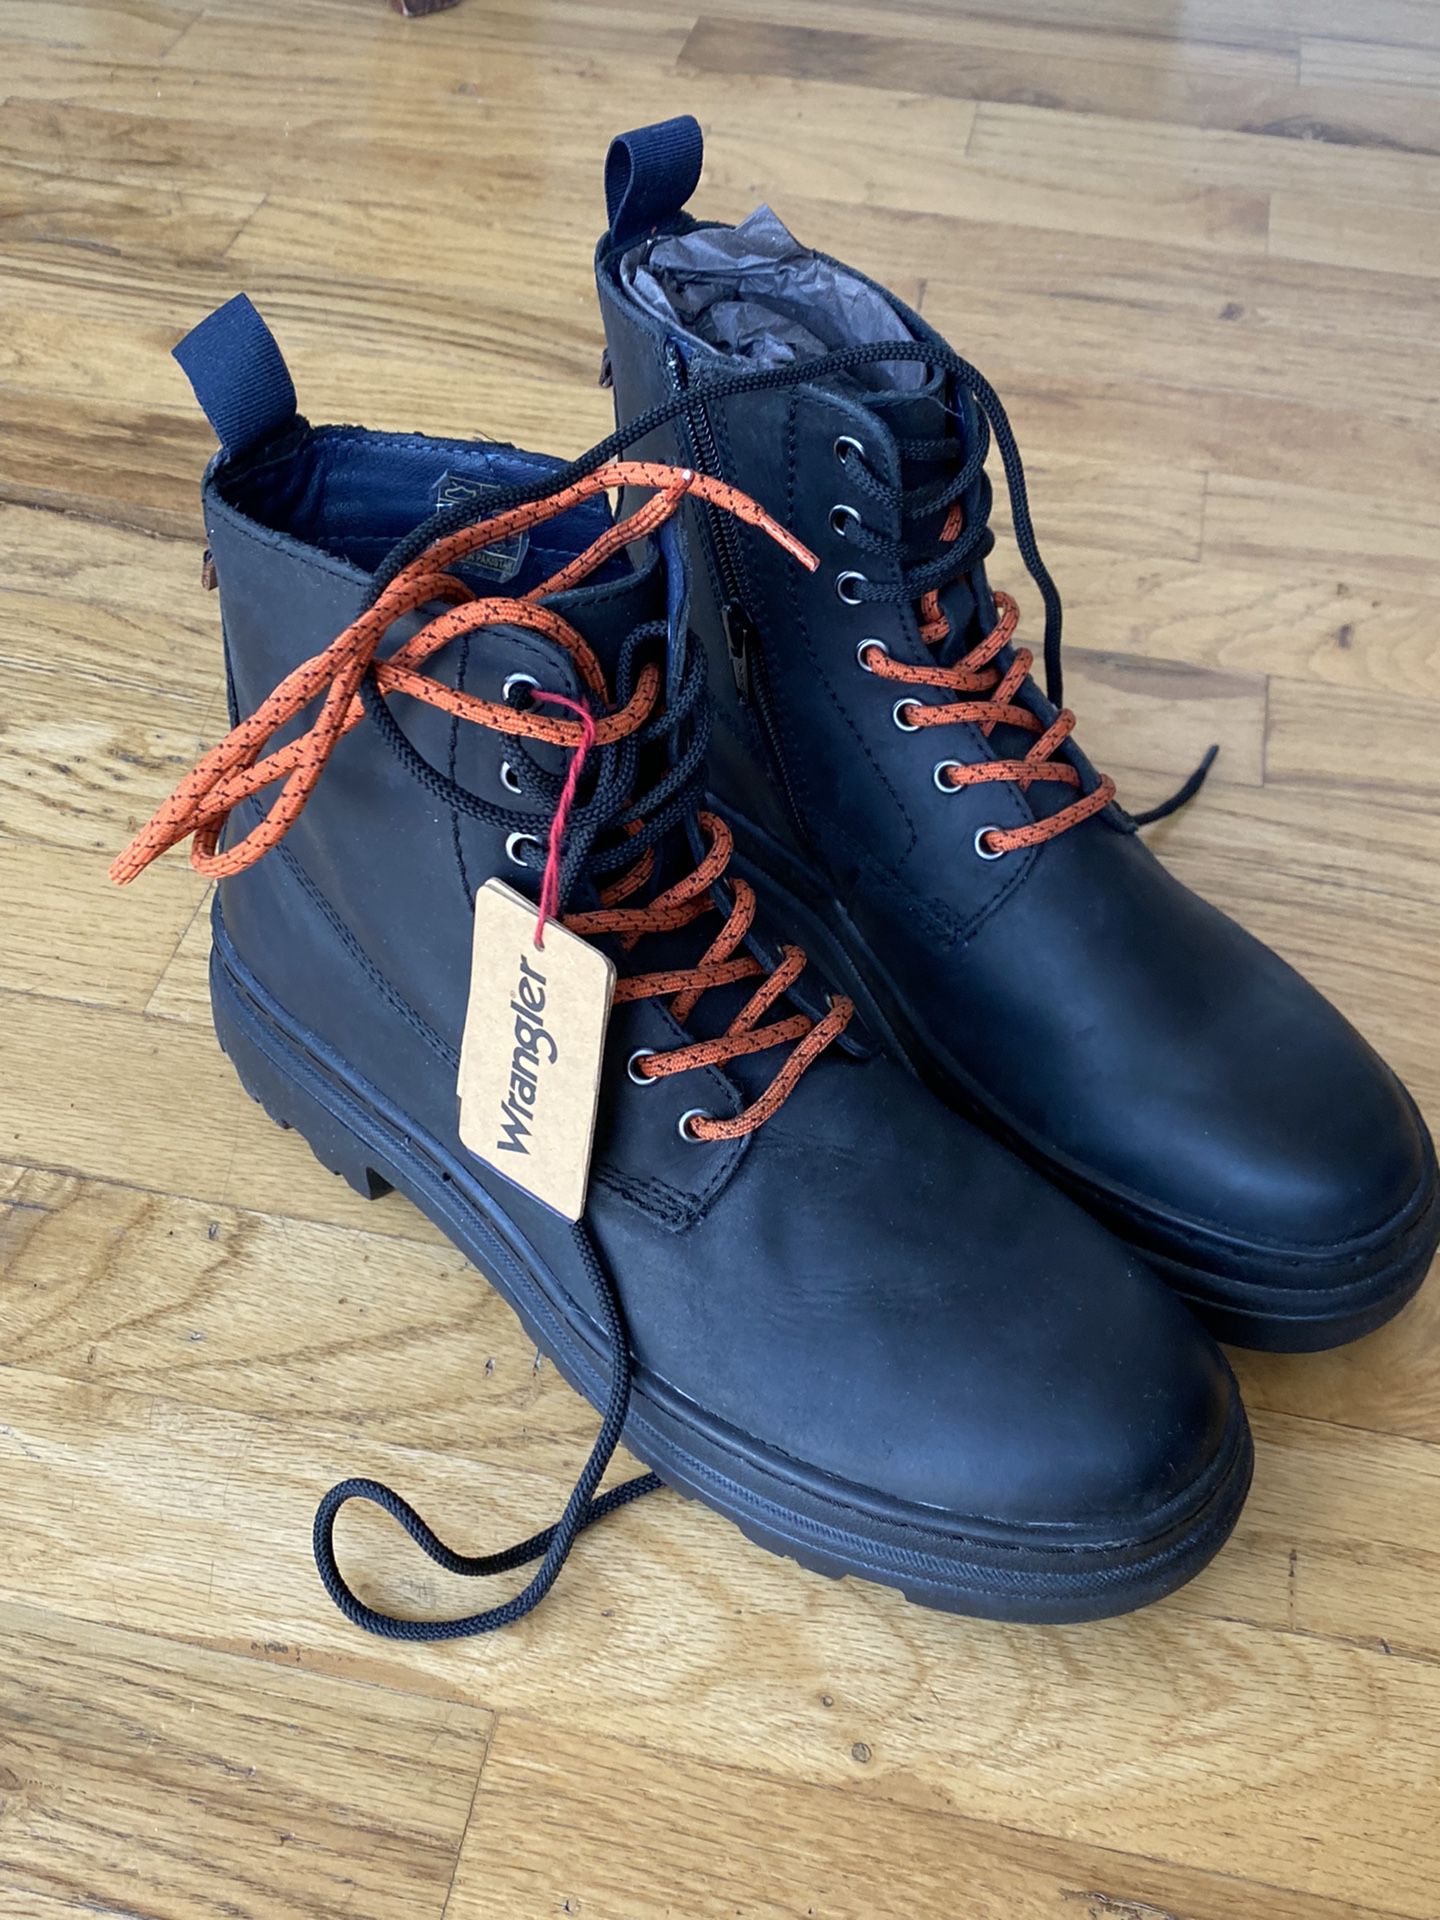 Wrangler Boots (not warn) for Sale in Chicago, IL - OfferUp